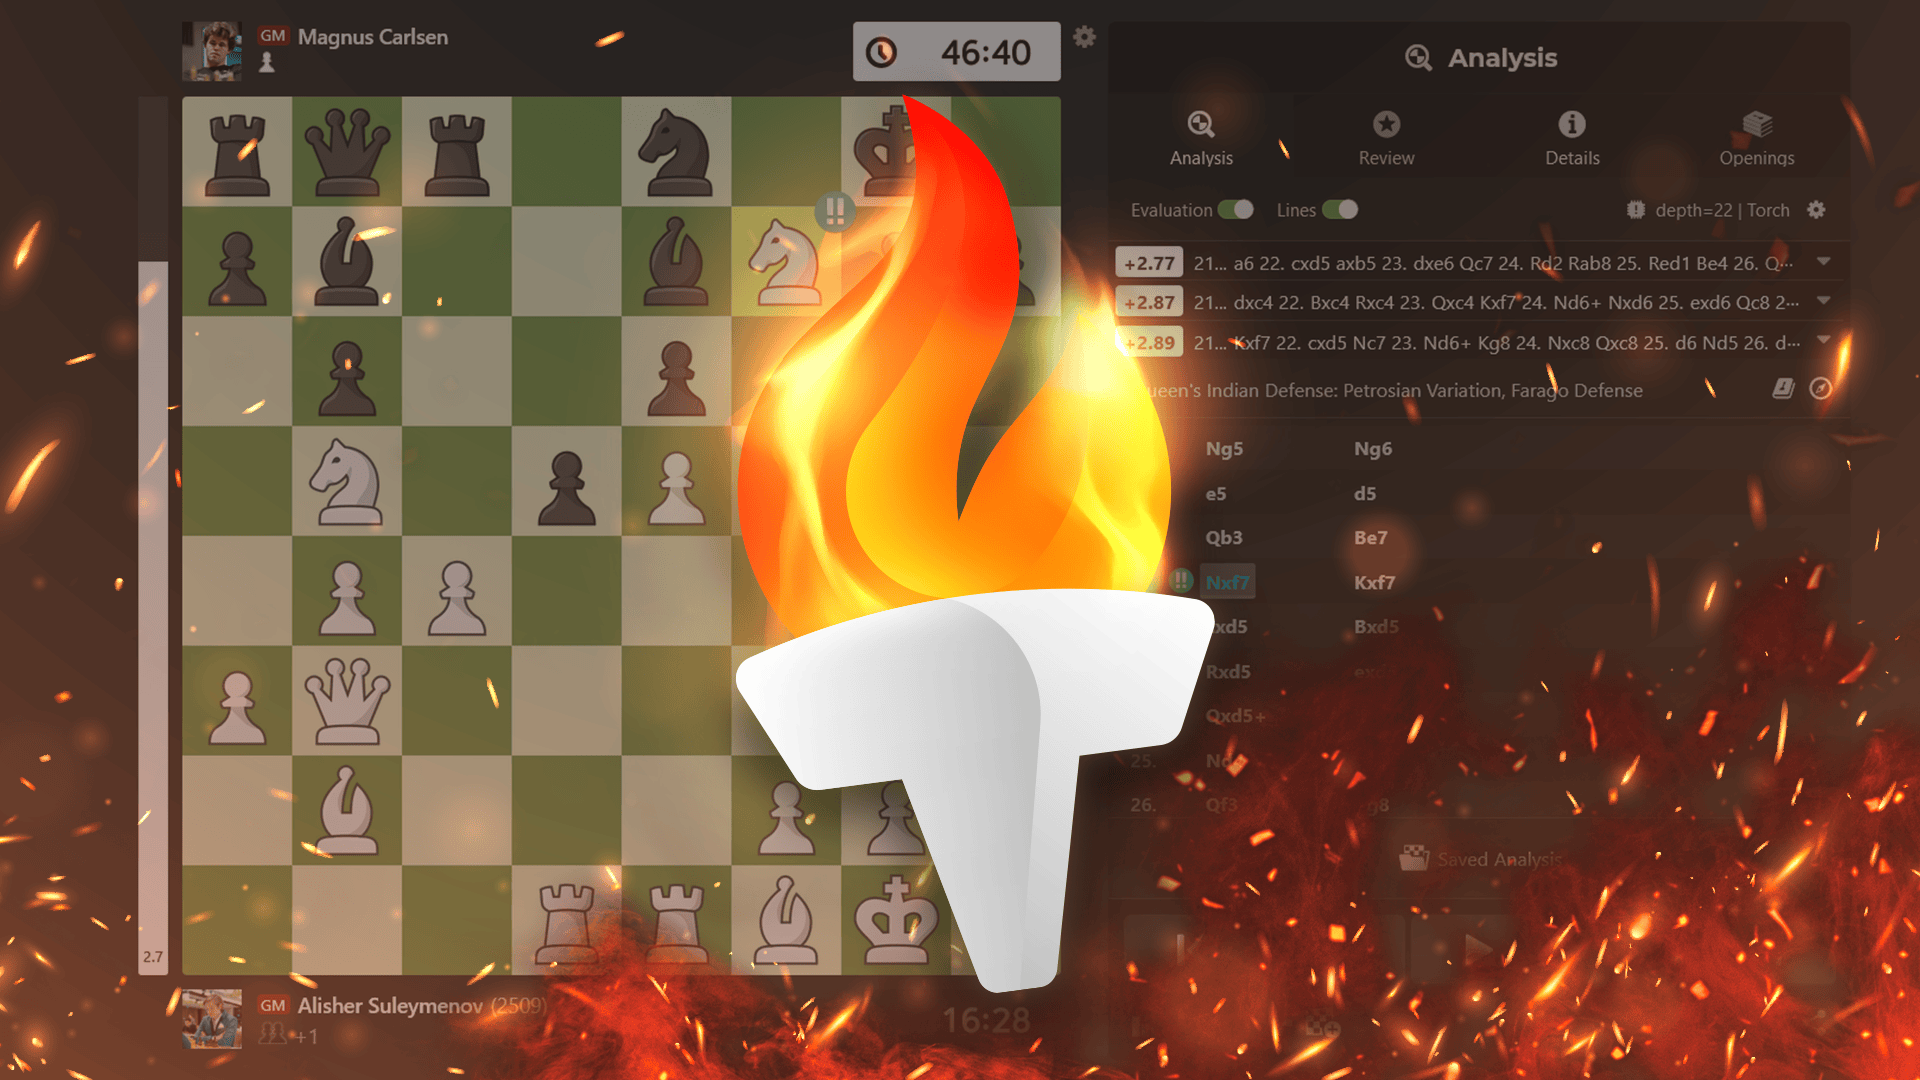 Why is the game of chess on fire in America?